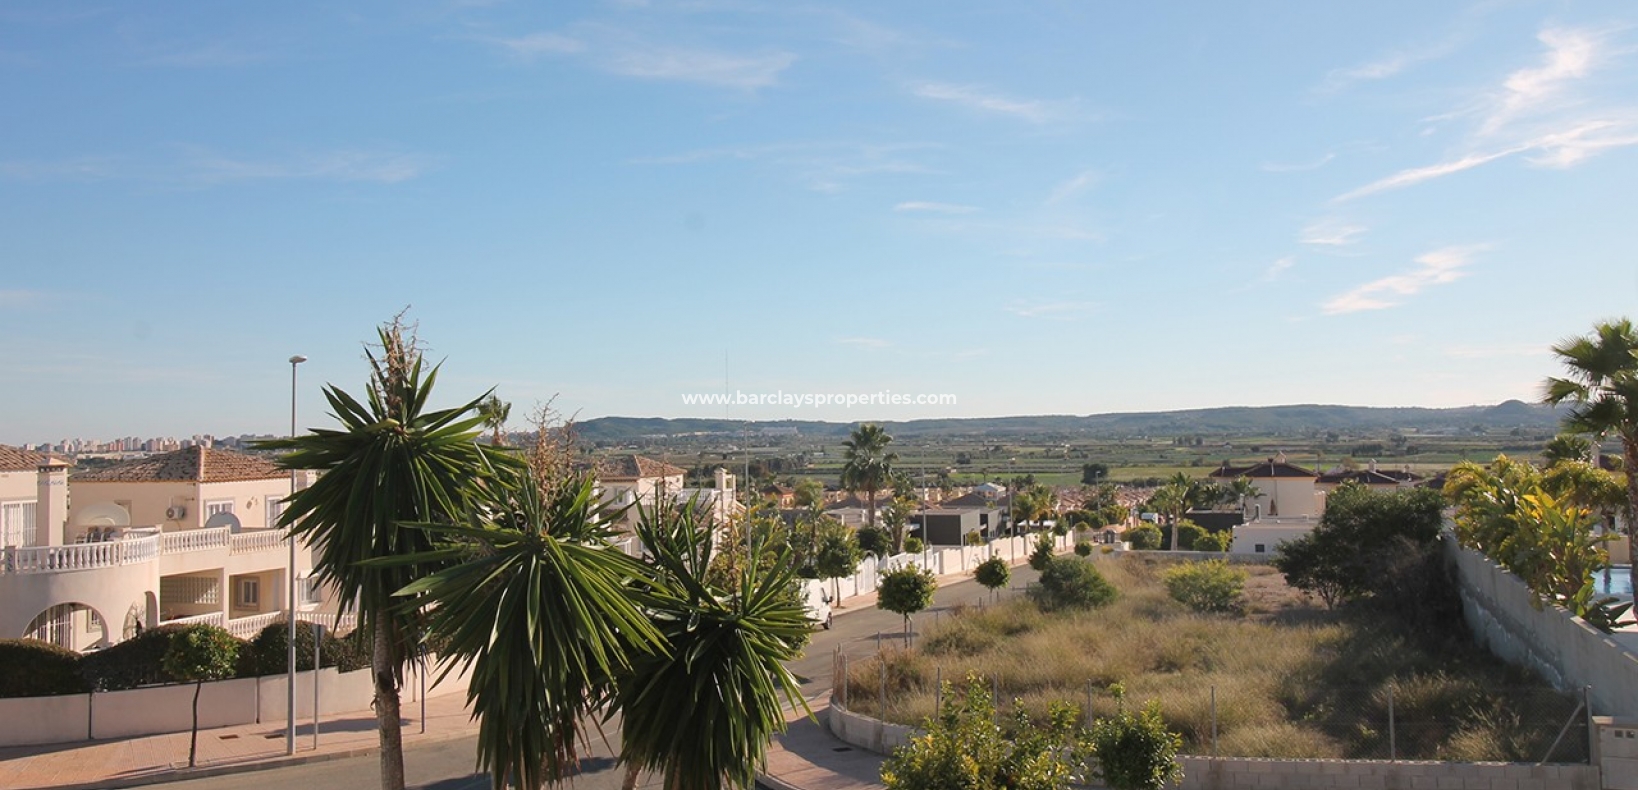 Views - Detached Villa for sale in Urb. La Marina, With Pool